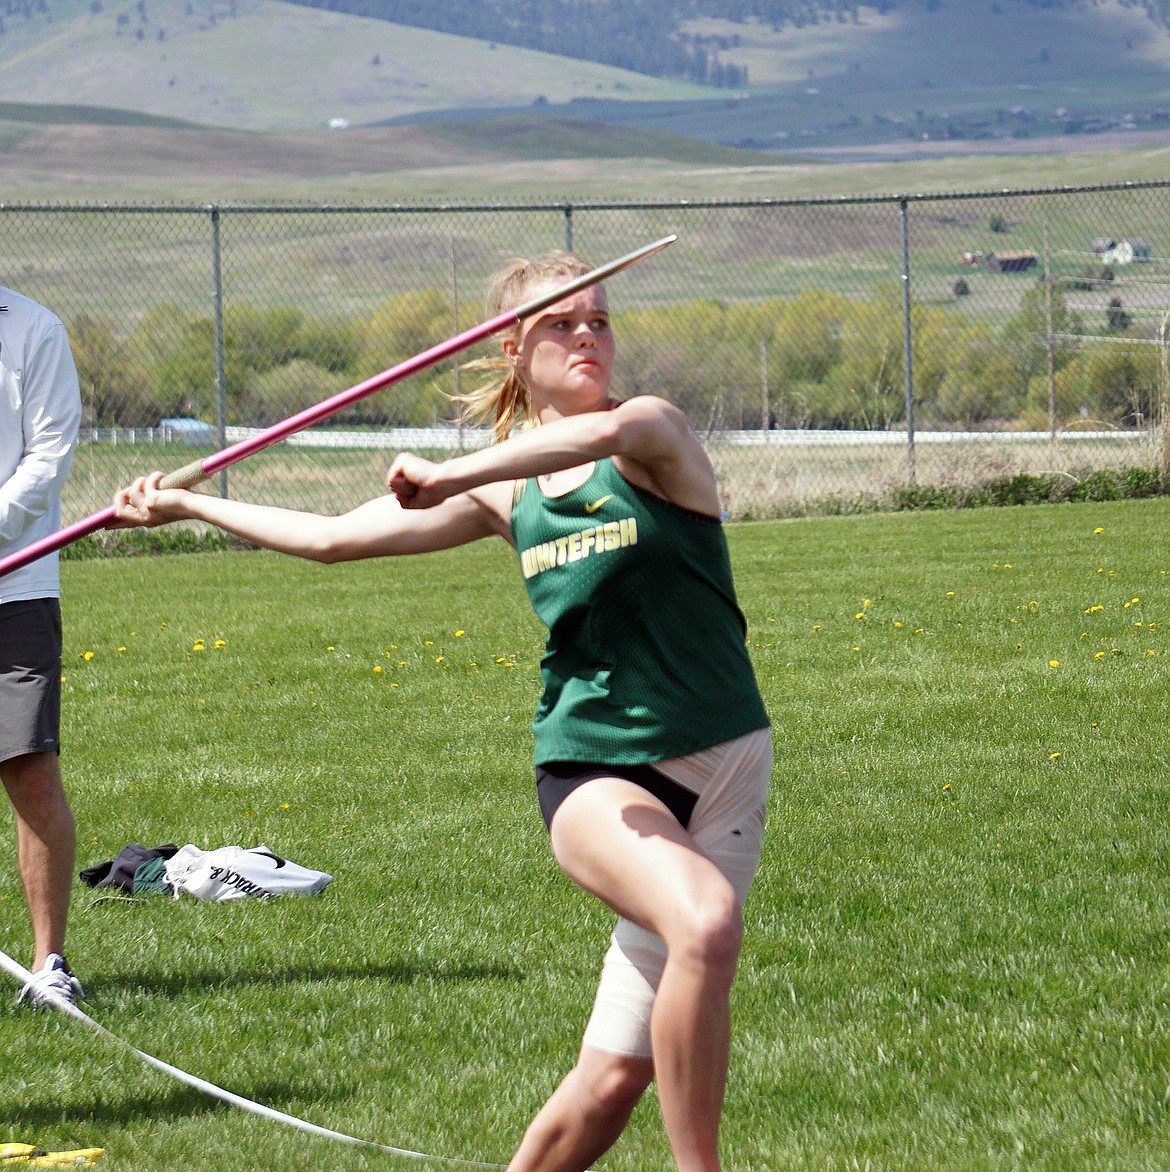 Whitefish junior Bailey Smith records a personal best (102’6”) in javelin at the Polson ABC Meet on Saturday. (Matt Weller photo)